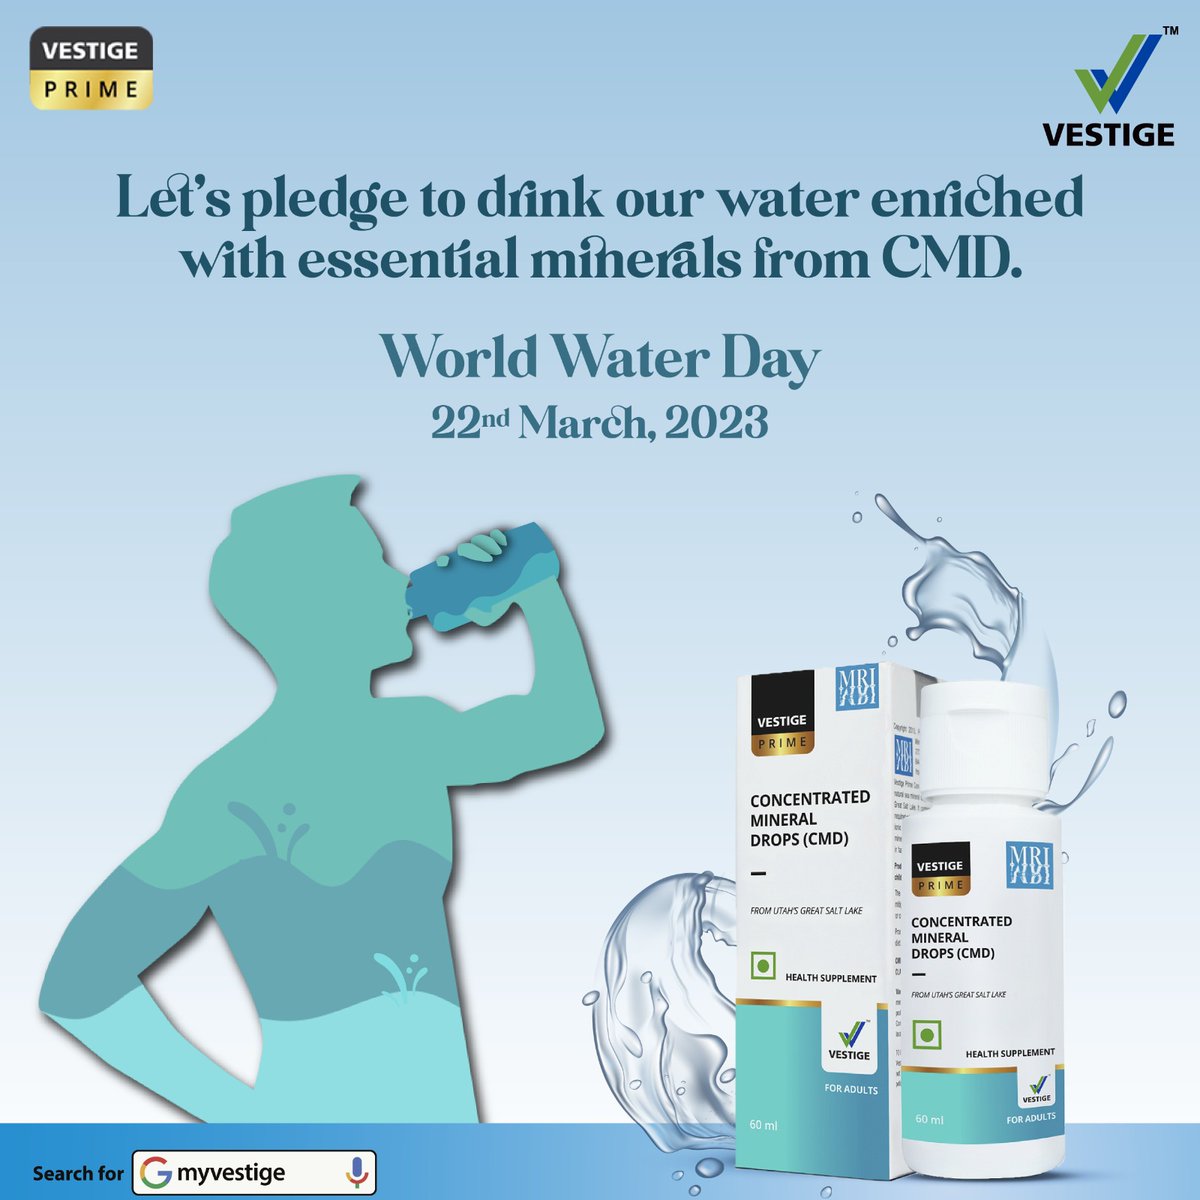 CMD is a Minral Water , This 💦Water from Utha Lake ,would Water day
#wishyouwellth #minraldrops #CMD #vestige  
Jal hai to jivan hai